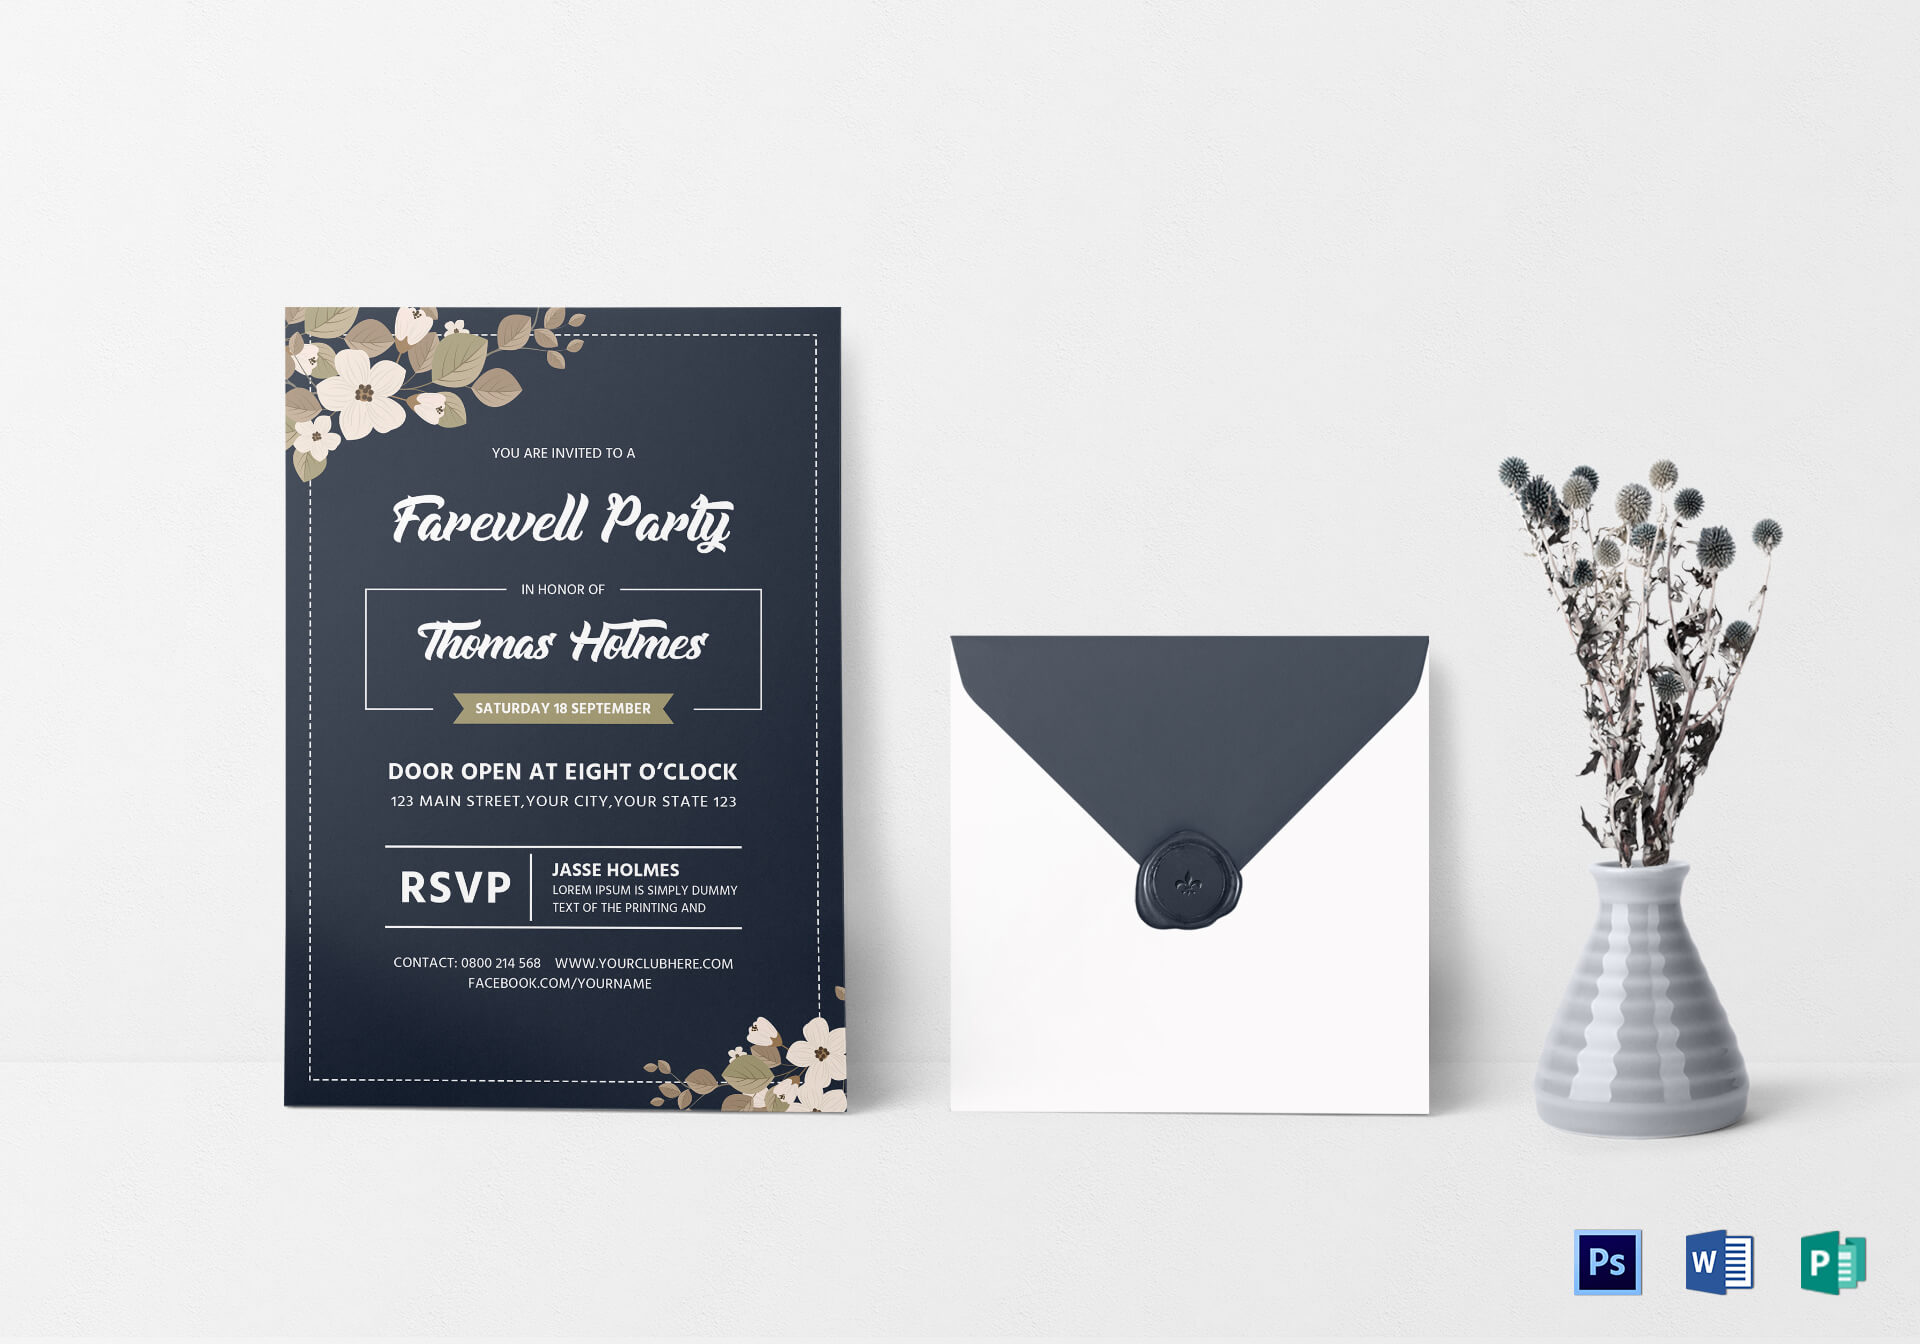 Farewell Party Invitation Card Template Intended For Farewell Card Template Word